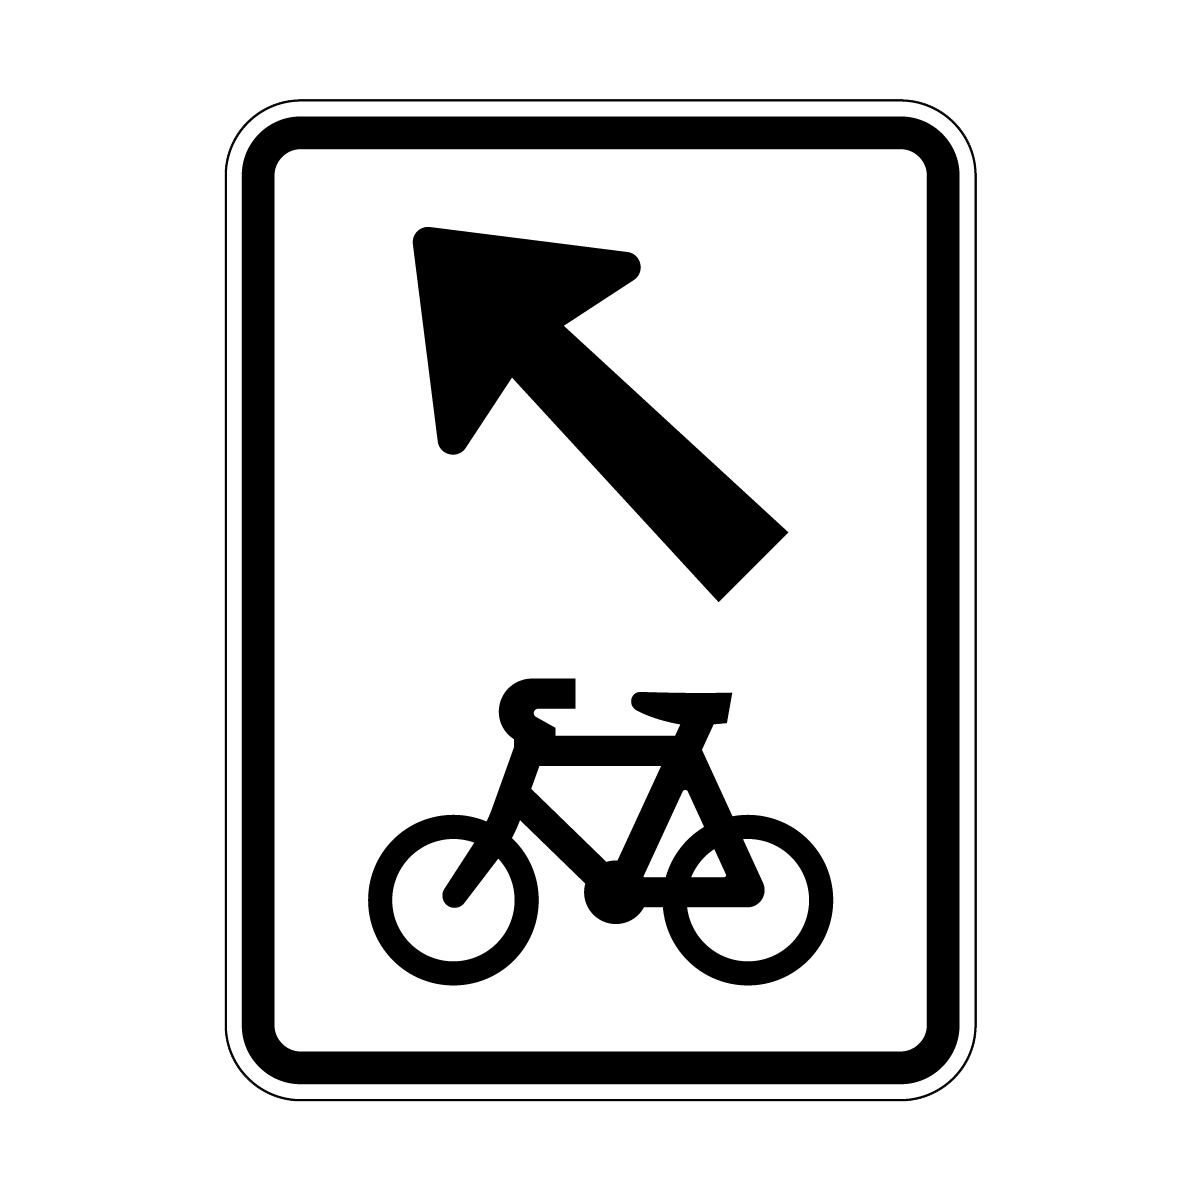 All Bicycles + Arrow Sign